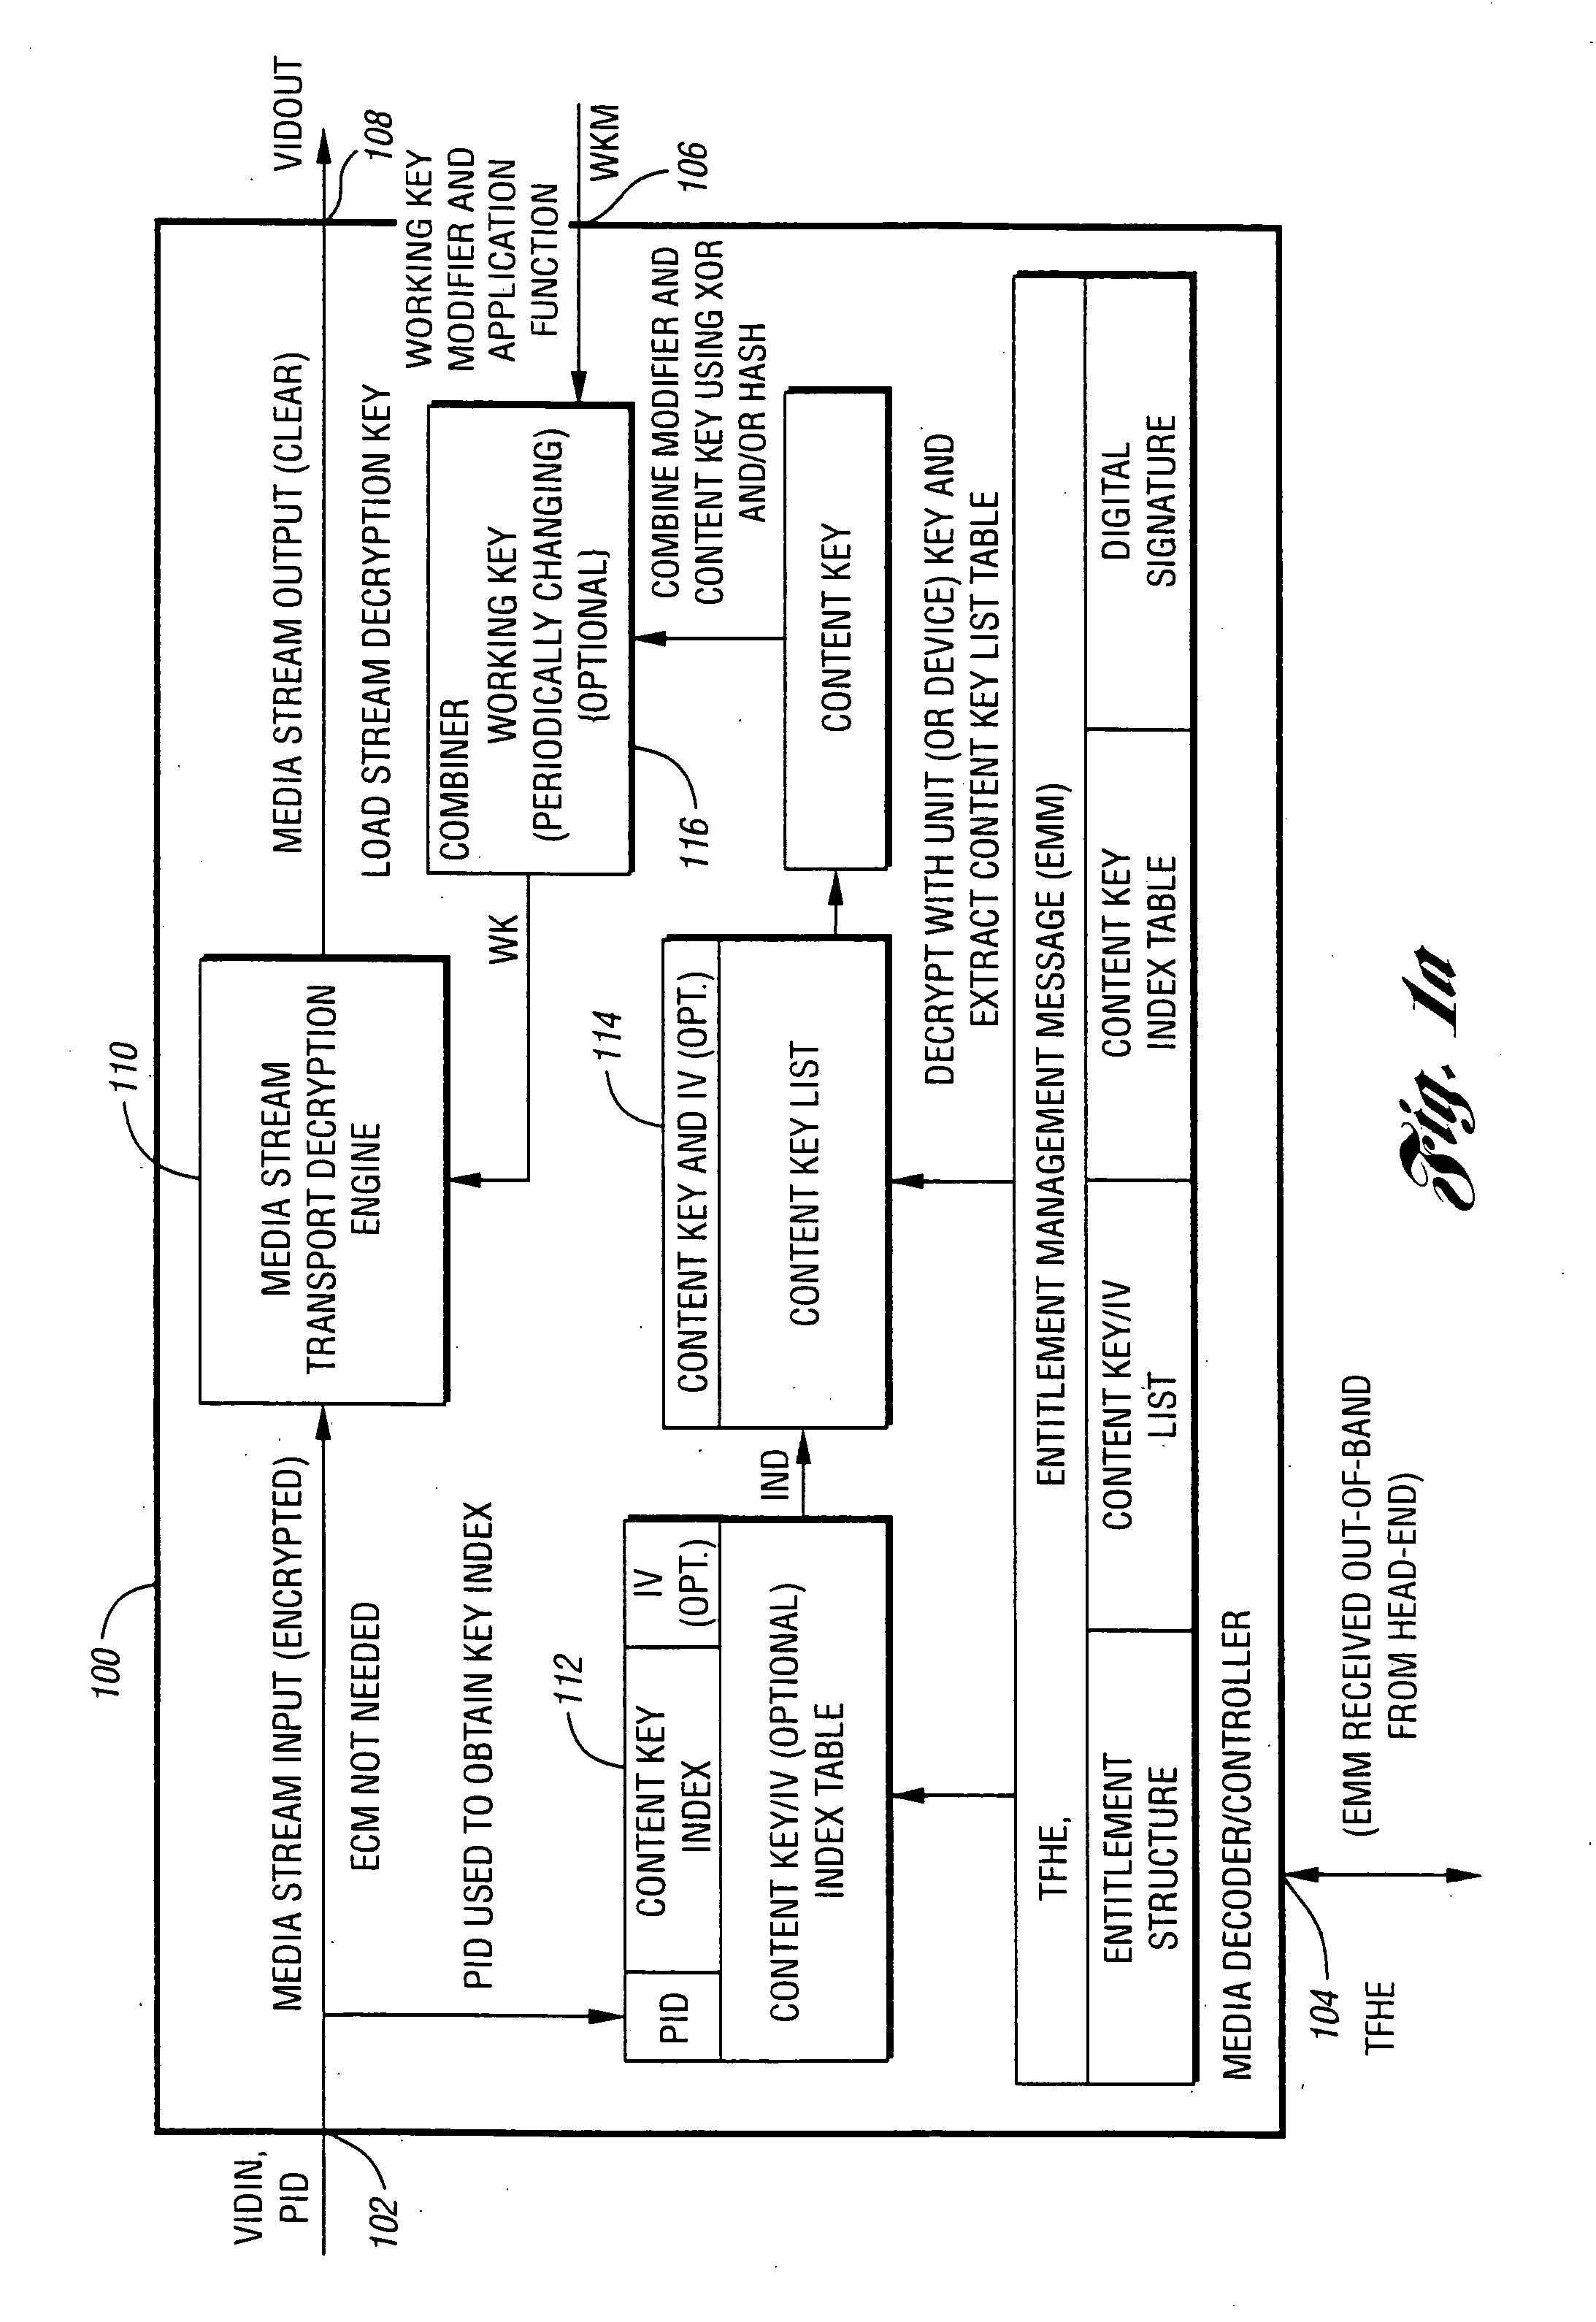 System and method for reduced hierarchy key management